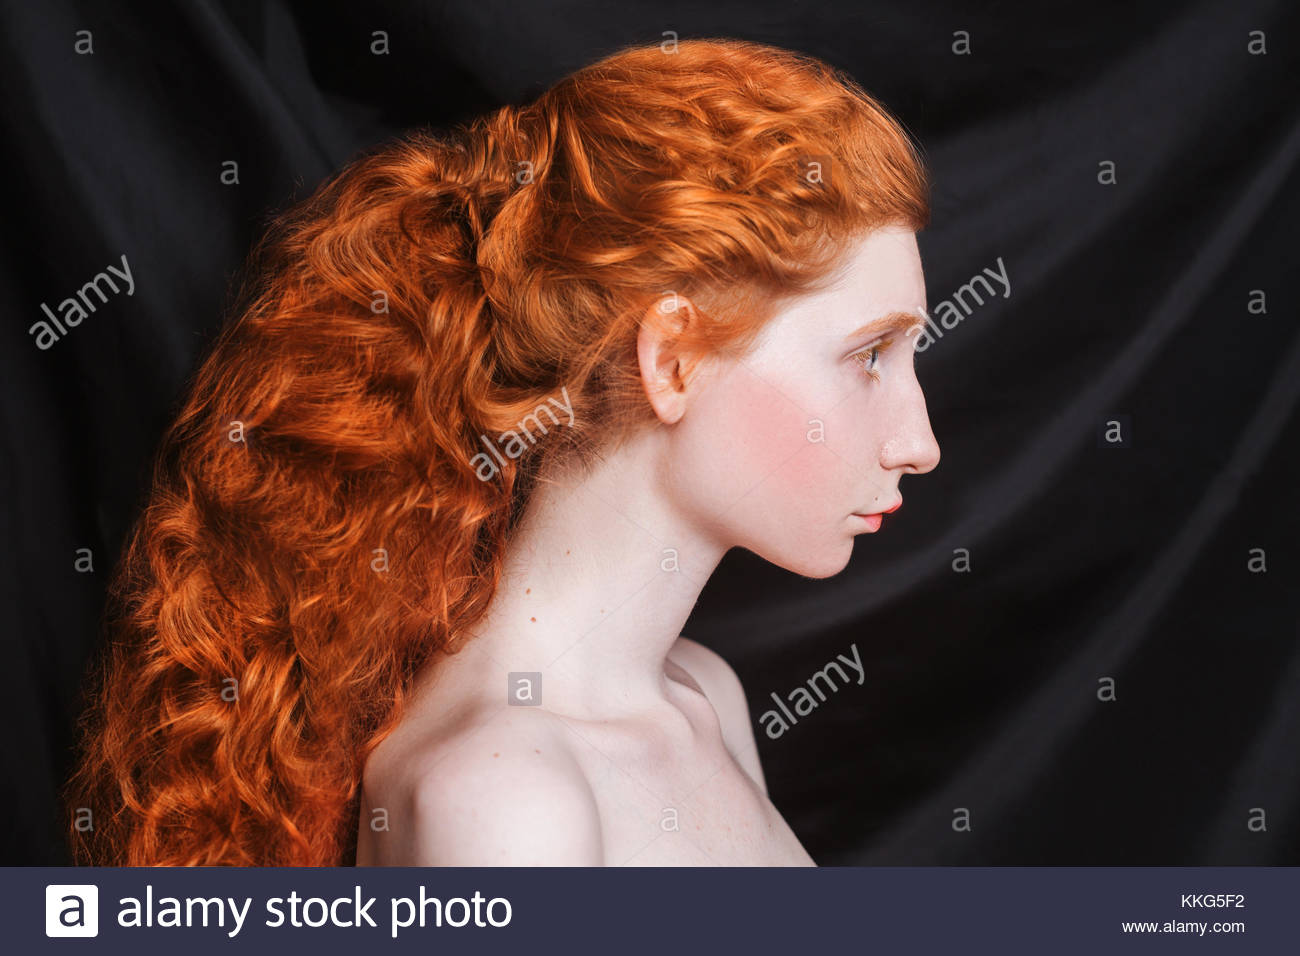 Woman With Long Curly Red Hair Gathered In Ponytail On Black Stock